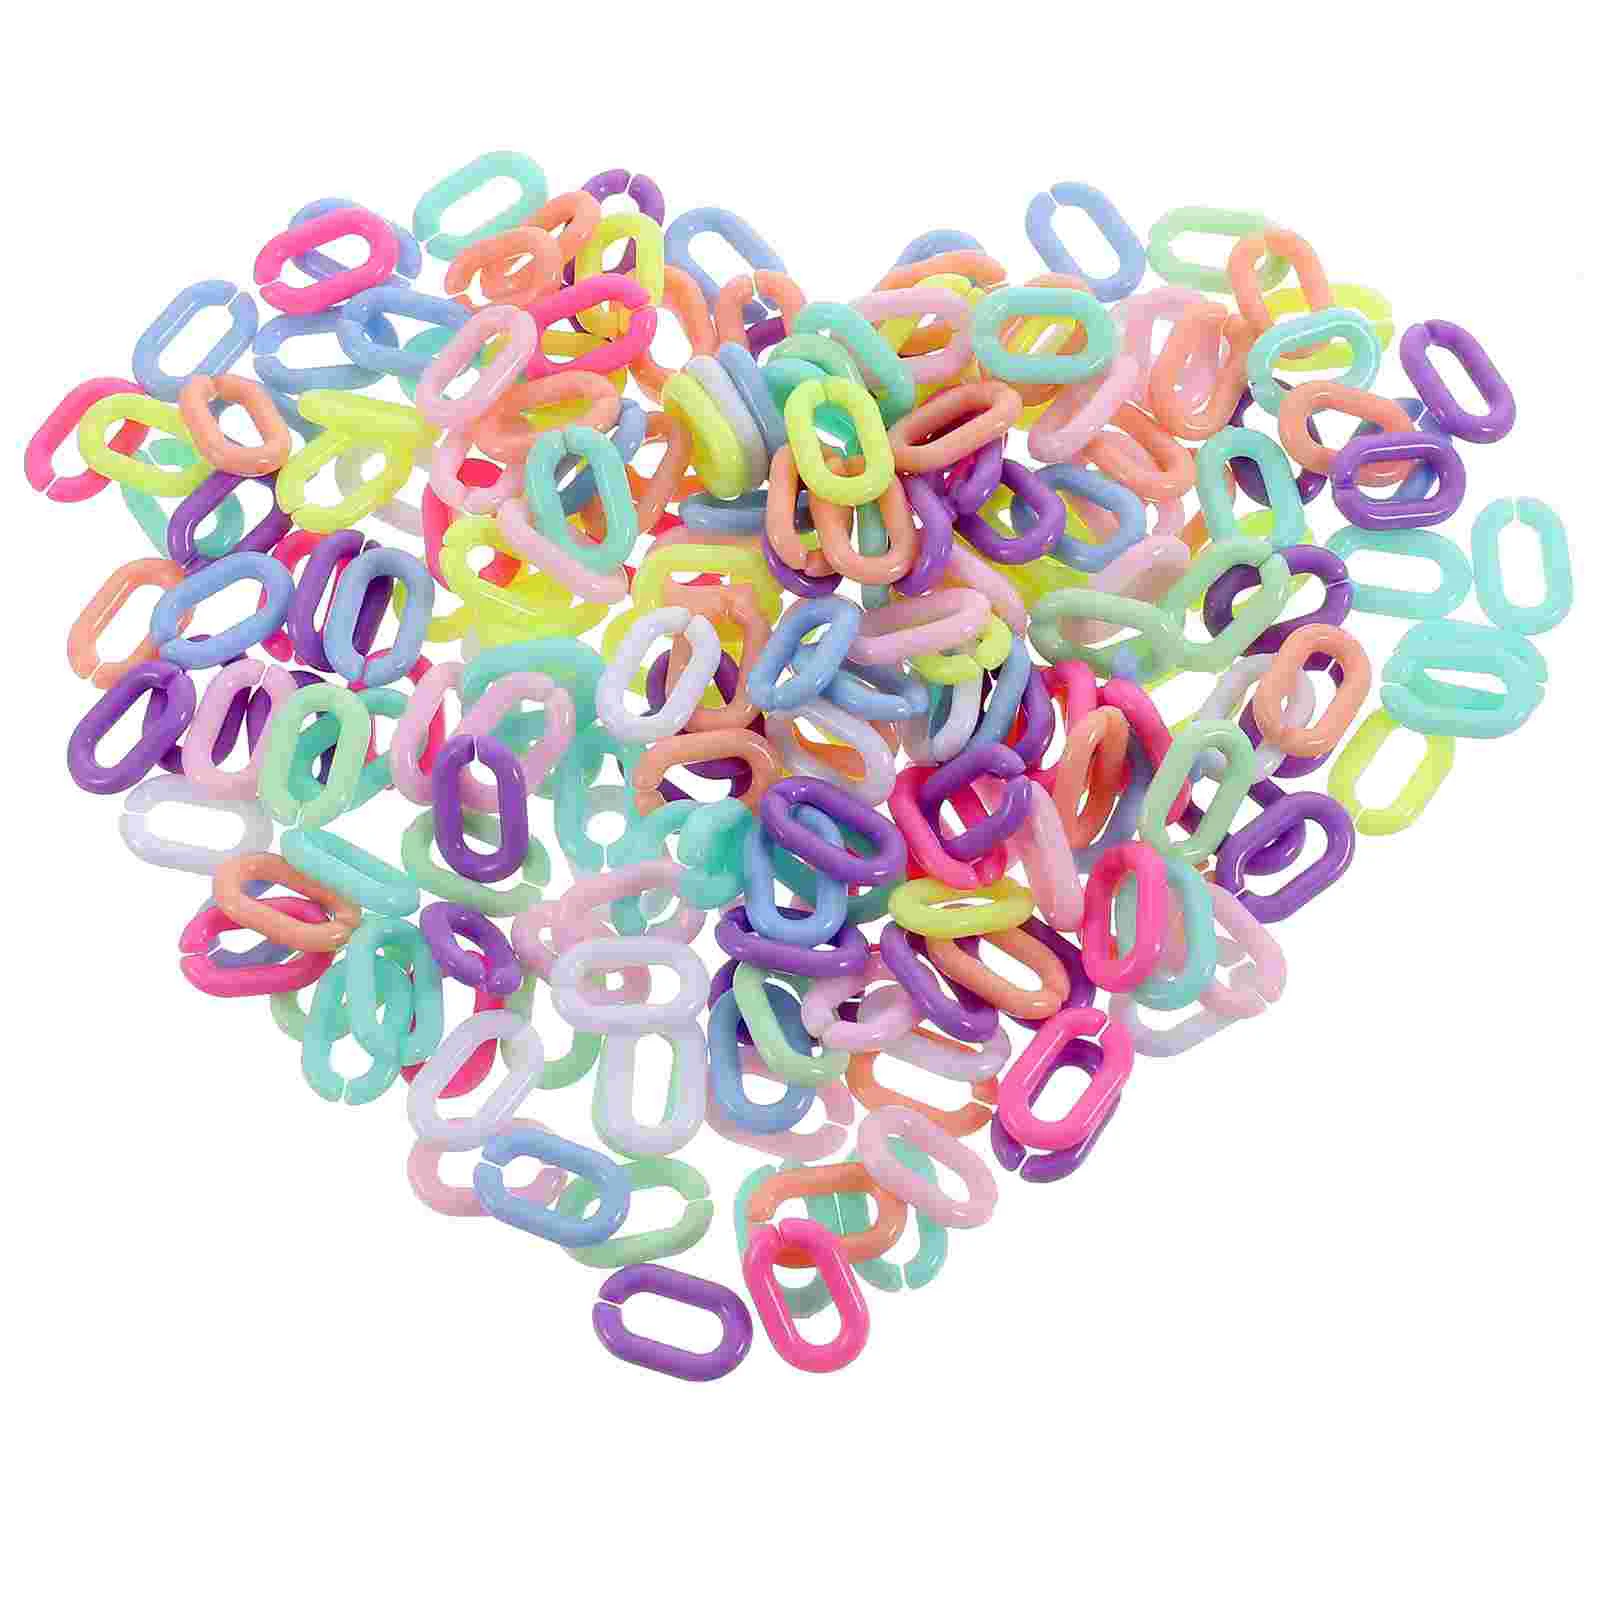 

800Pcs Acrylic Linking Rings Quick Link Connectors Open Link Rings for DIY Purse Strap Chain